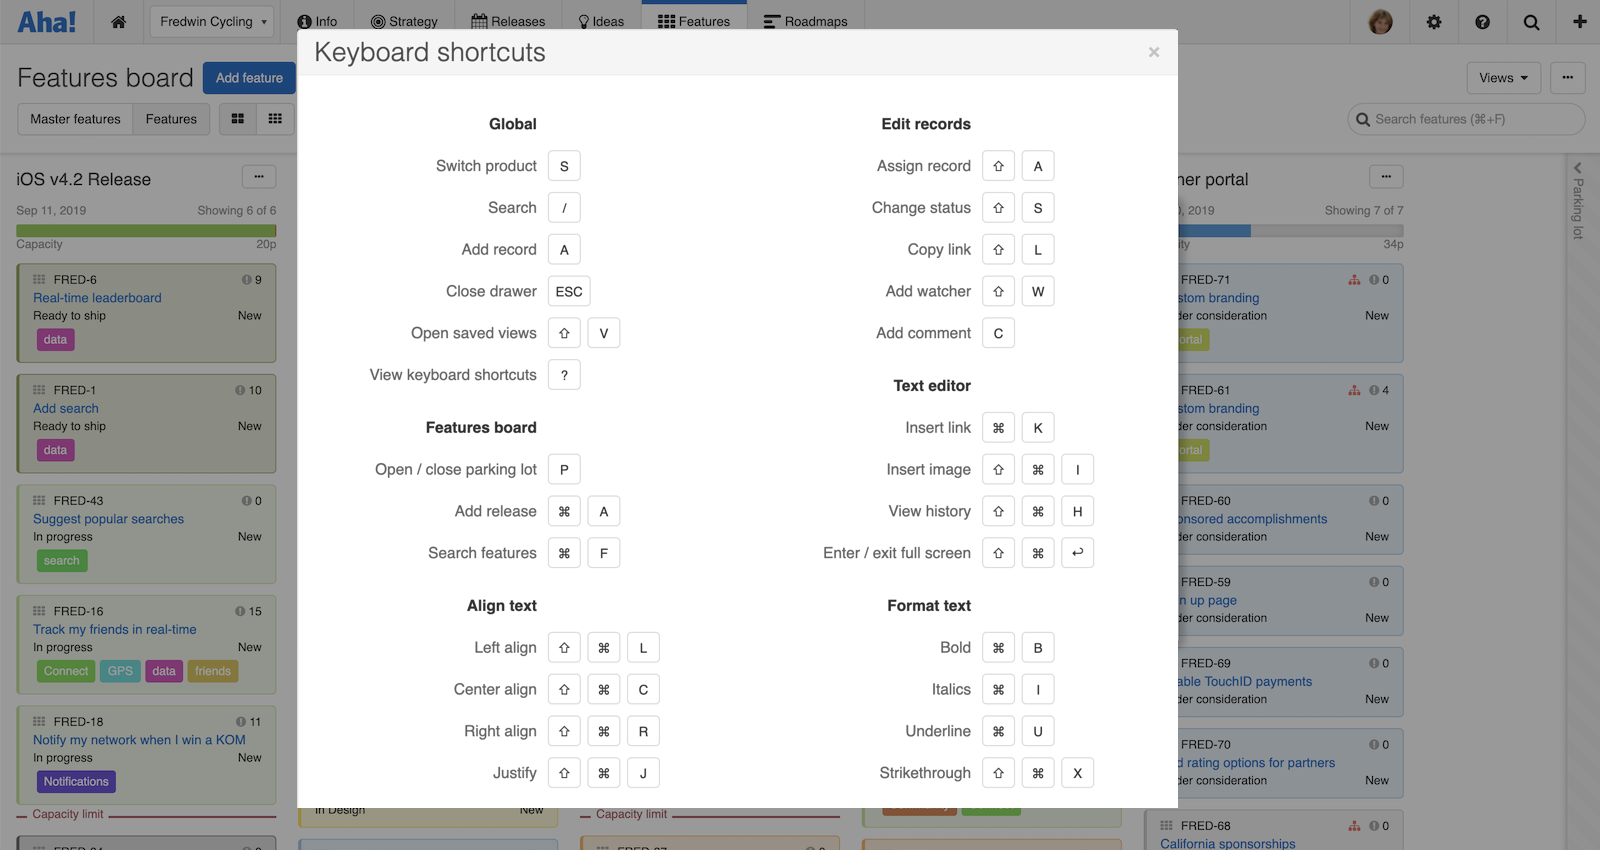 Just Launched! — New Keyboard Shortcuts in Aha!